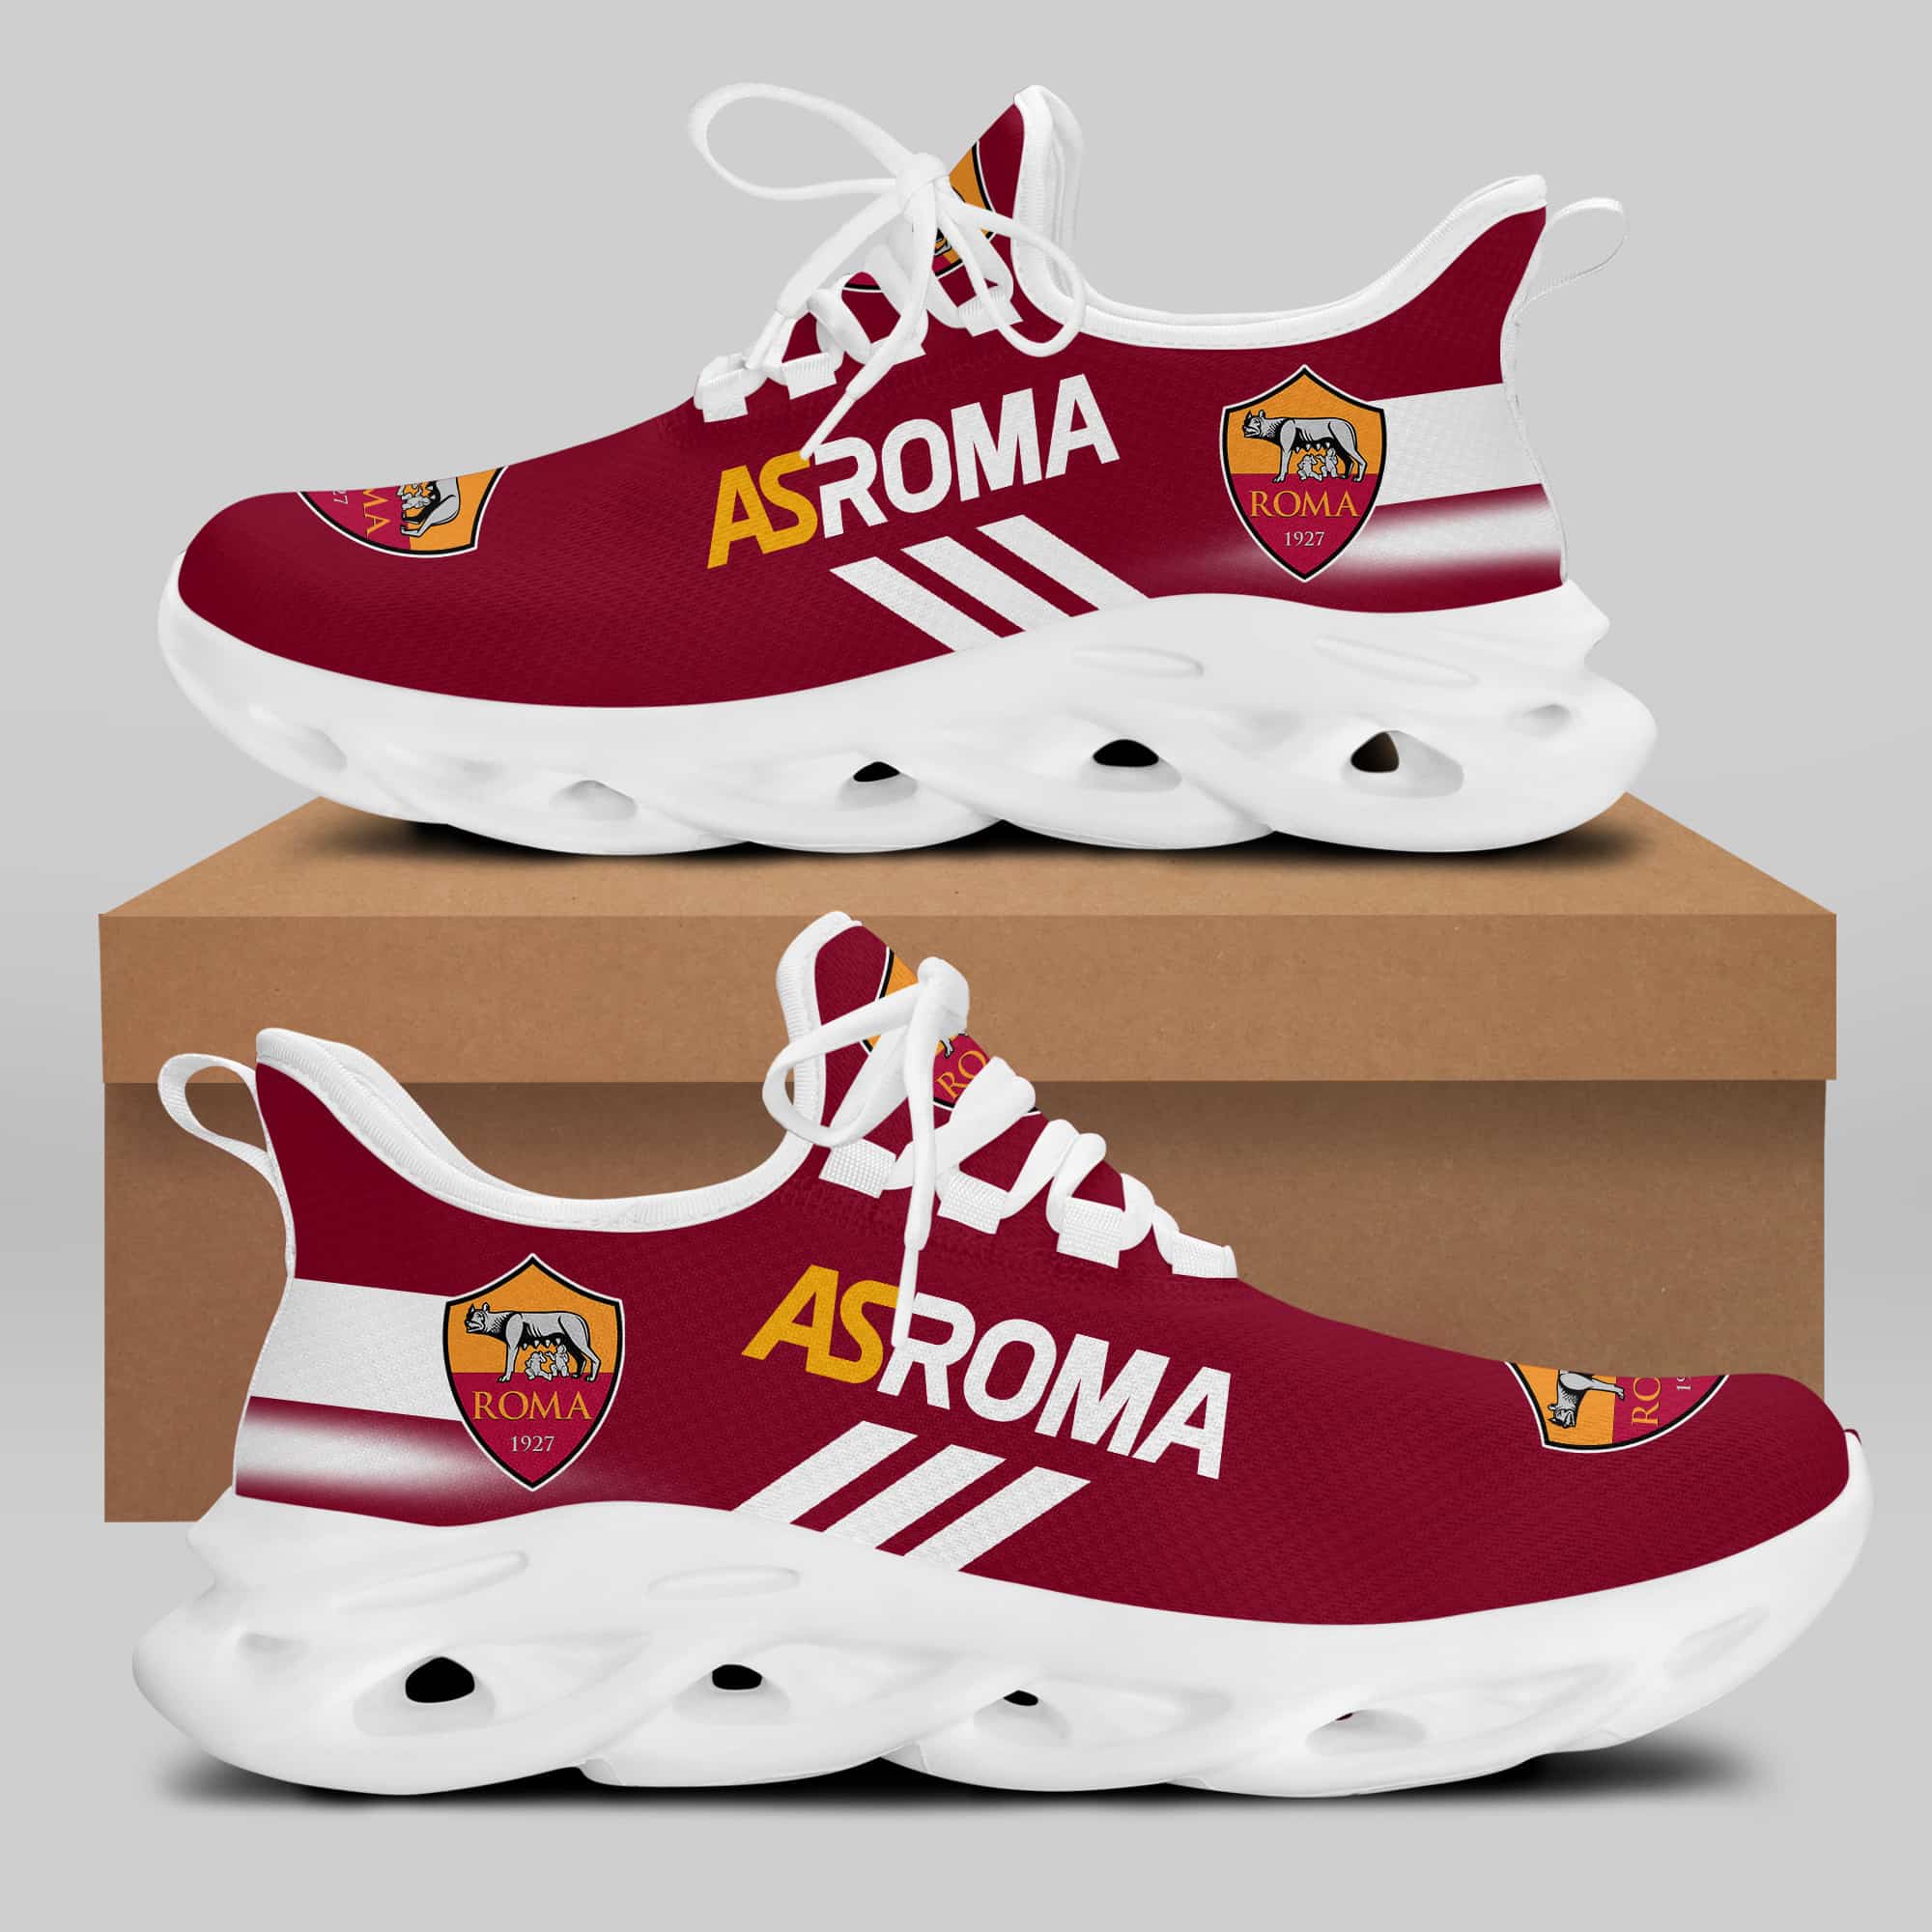 As Roma Running Shoes Max Soul Shoes Sneakers Ver 15 1